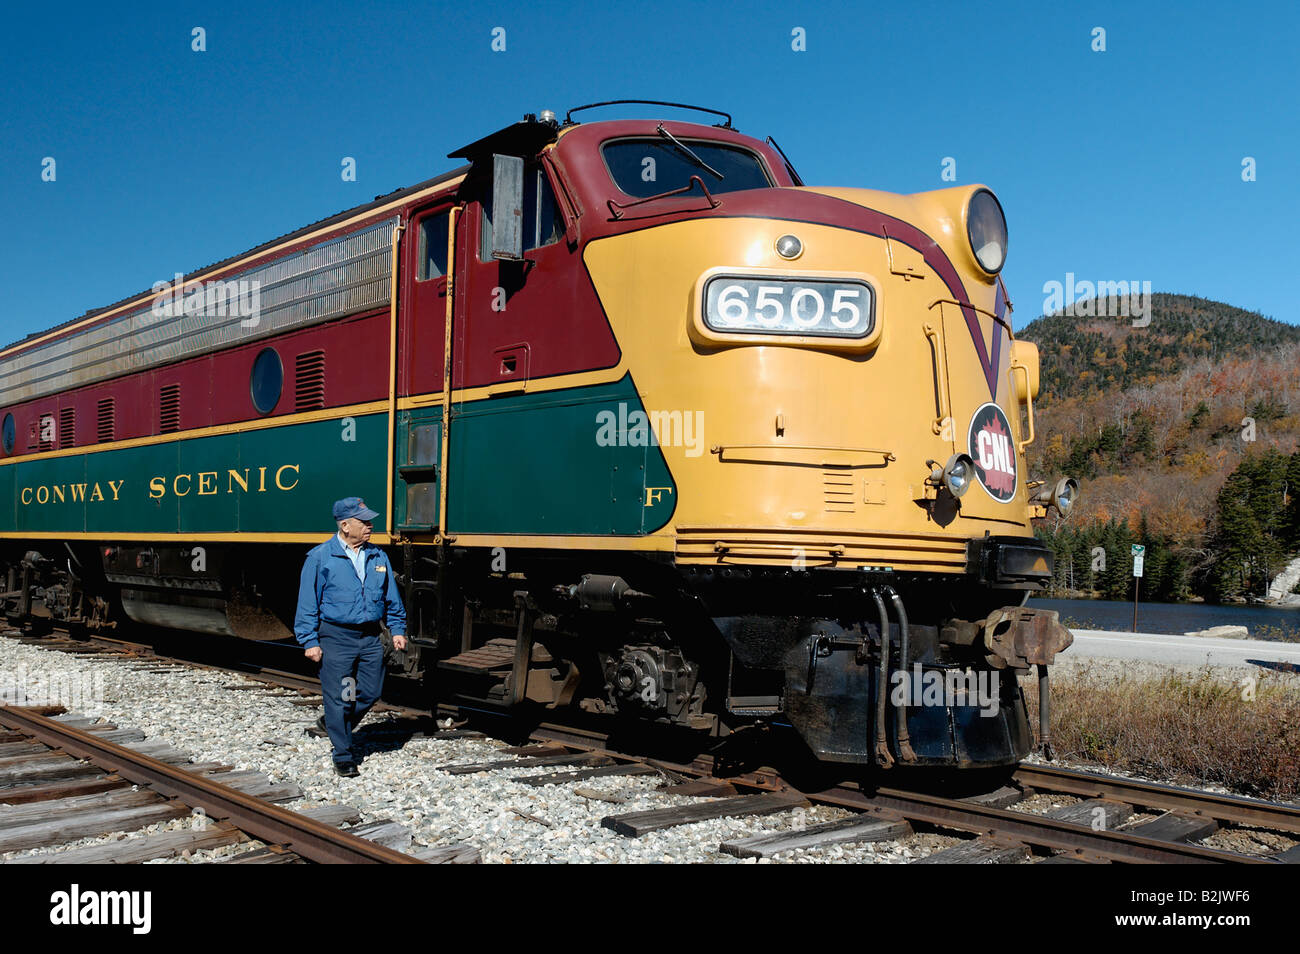 Engineer Walking Beside Diesel Electric Locomotive of the Conway Scenic Railroad at the Crawford Depot in the White Mountains Stock Photo